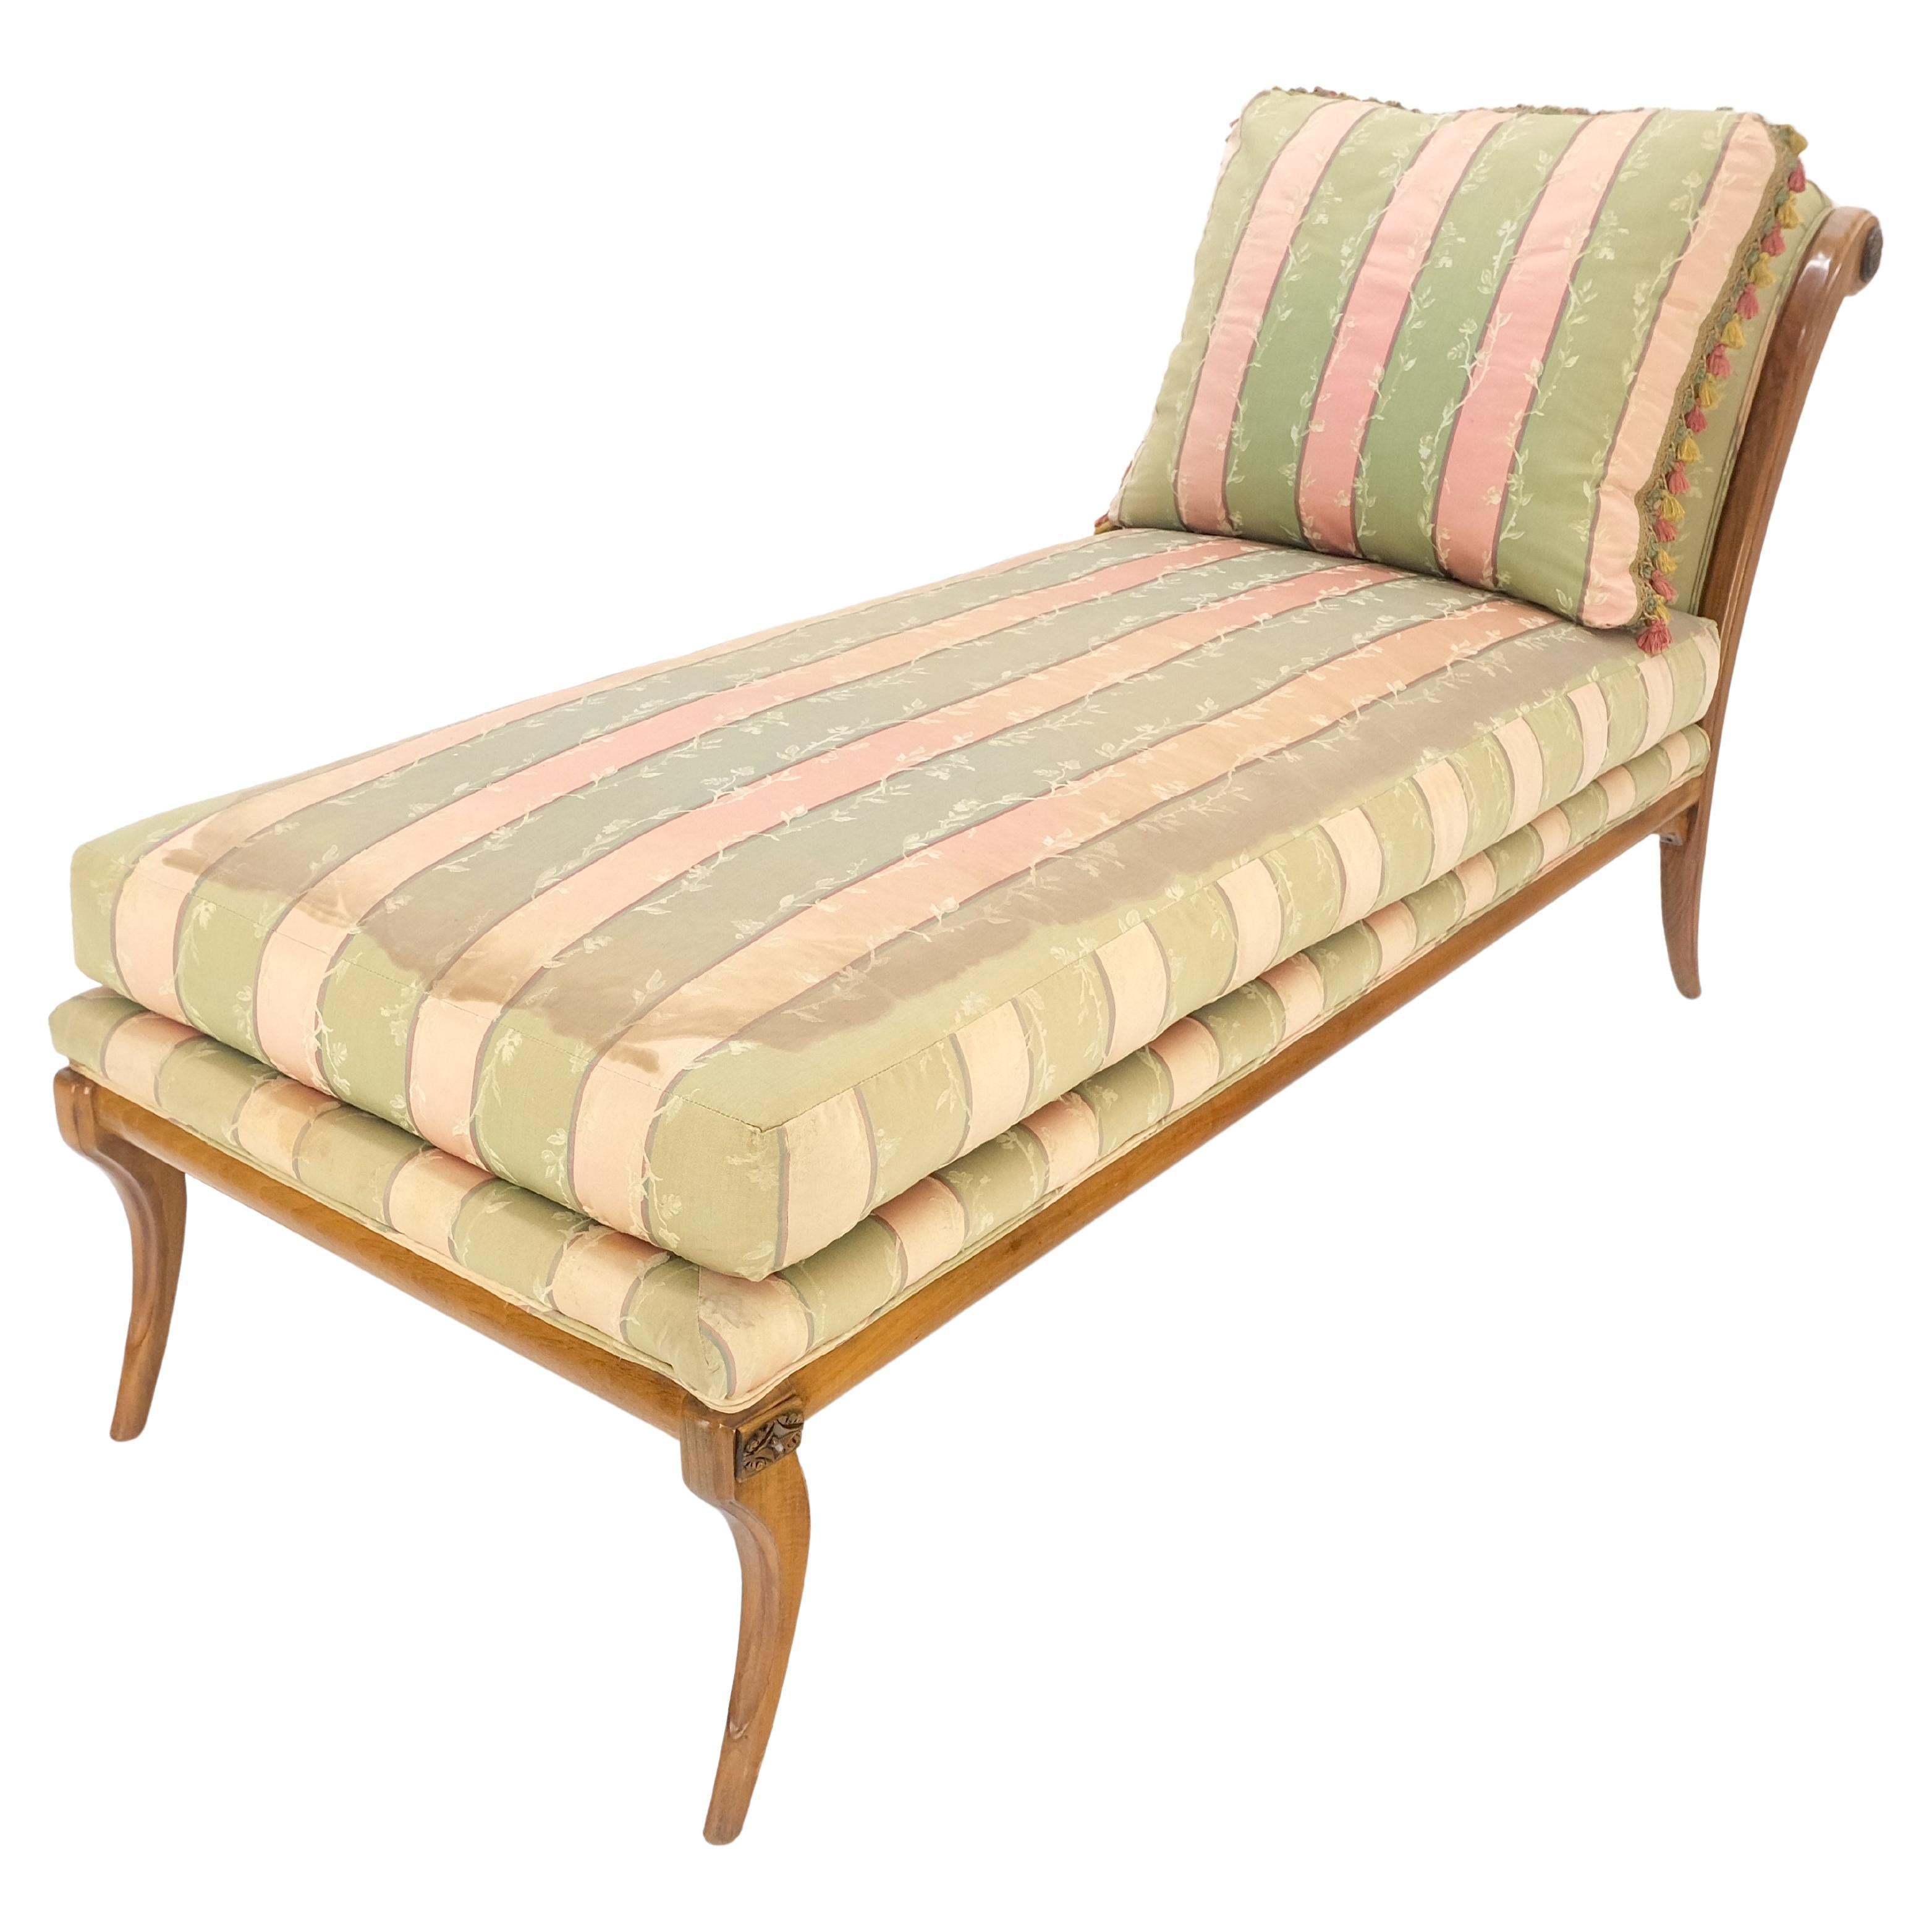 American Klismos Light Carved Walnut Frame Chaise Lounge Chair Stunning MIINT Frame! For Sale